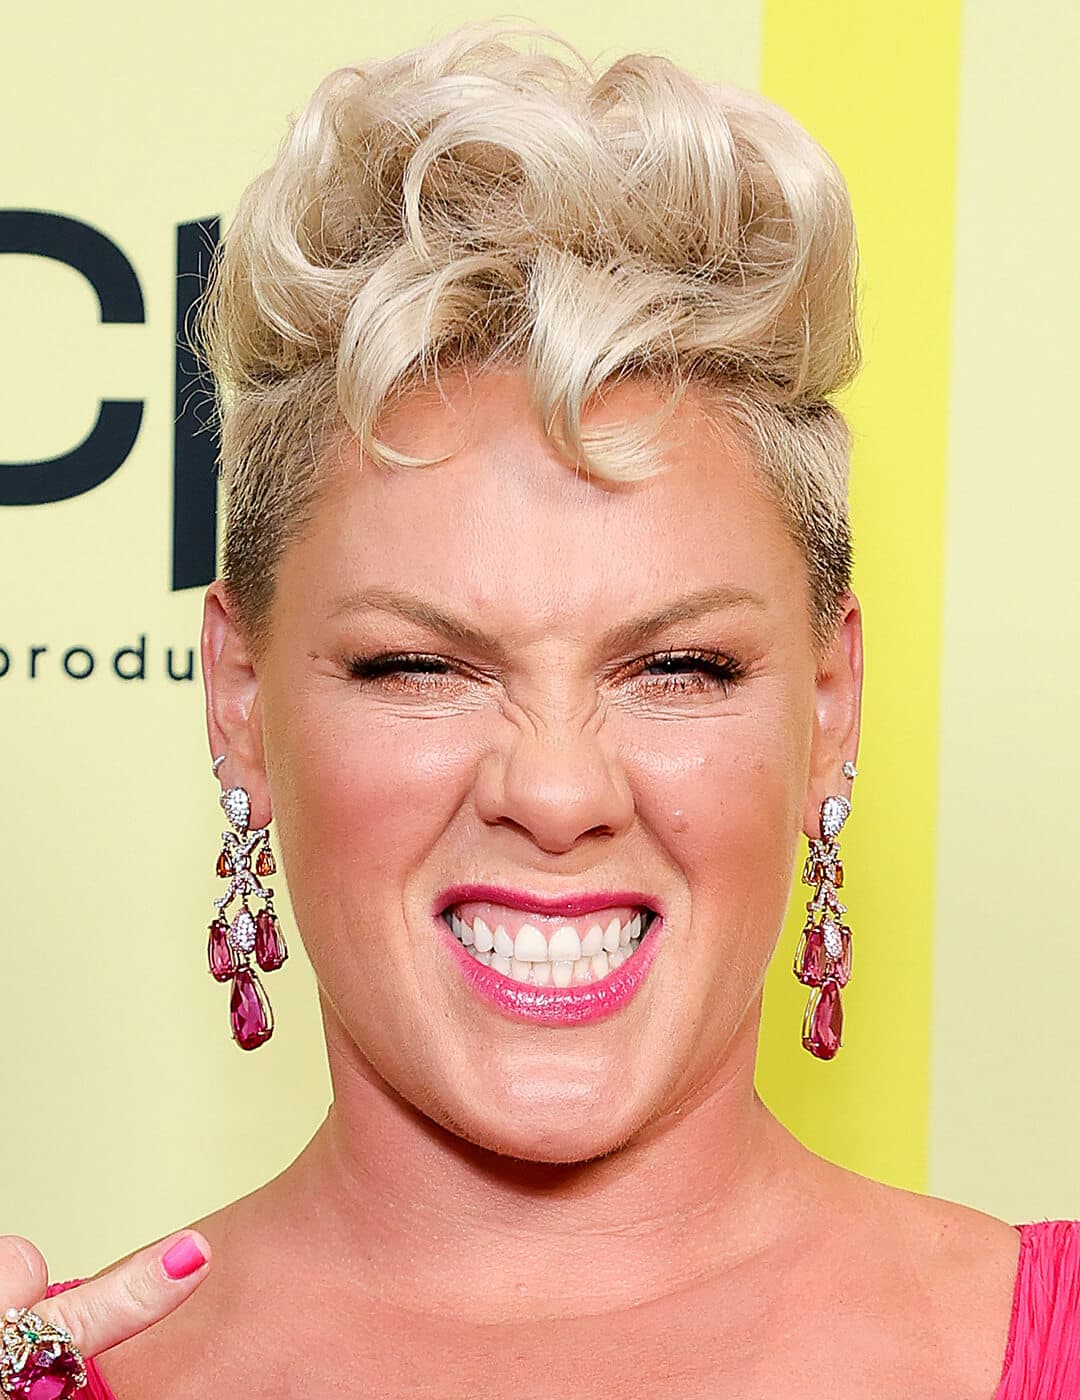 P!nk rocking a curly pompadour and ombré undercut hairstyle and posing